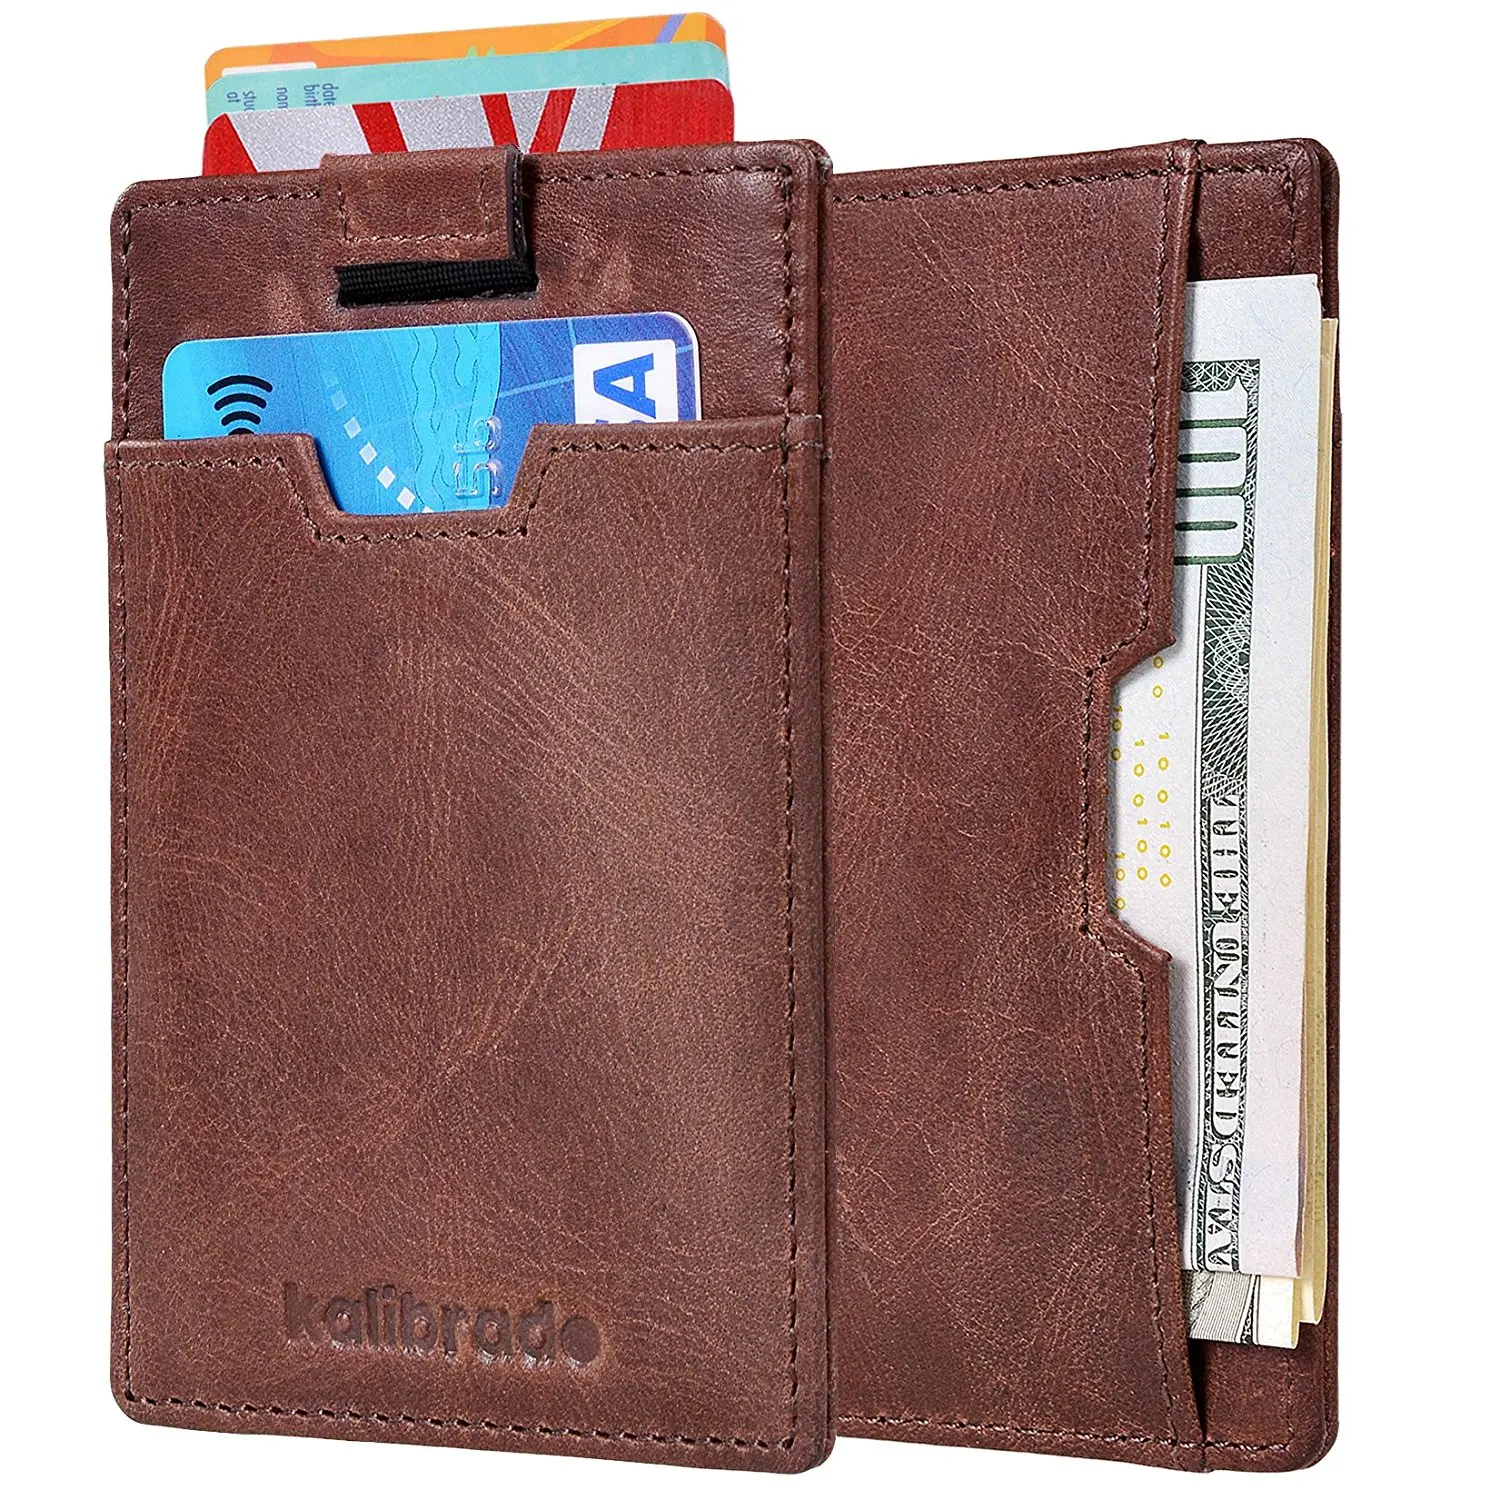 Buy Slim Mens Sleeve Front Pocket Wallet Made from Genuine Leather including RFID Blocking ...